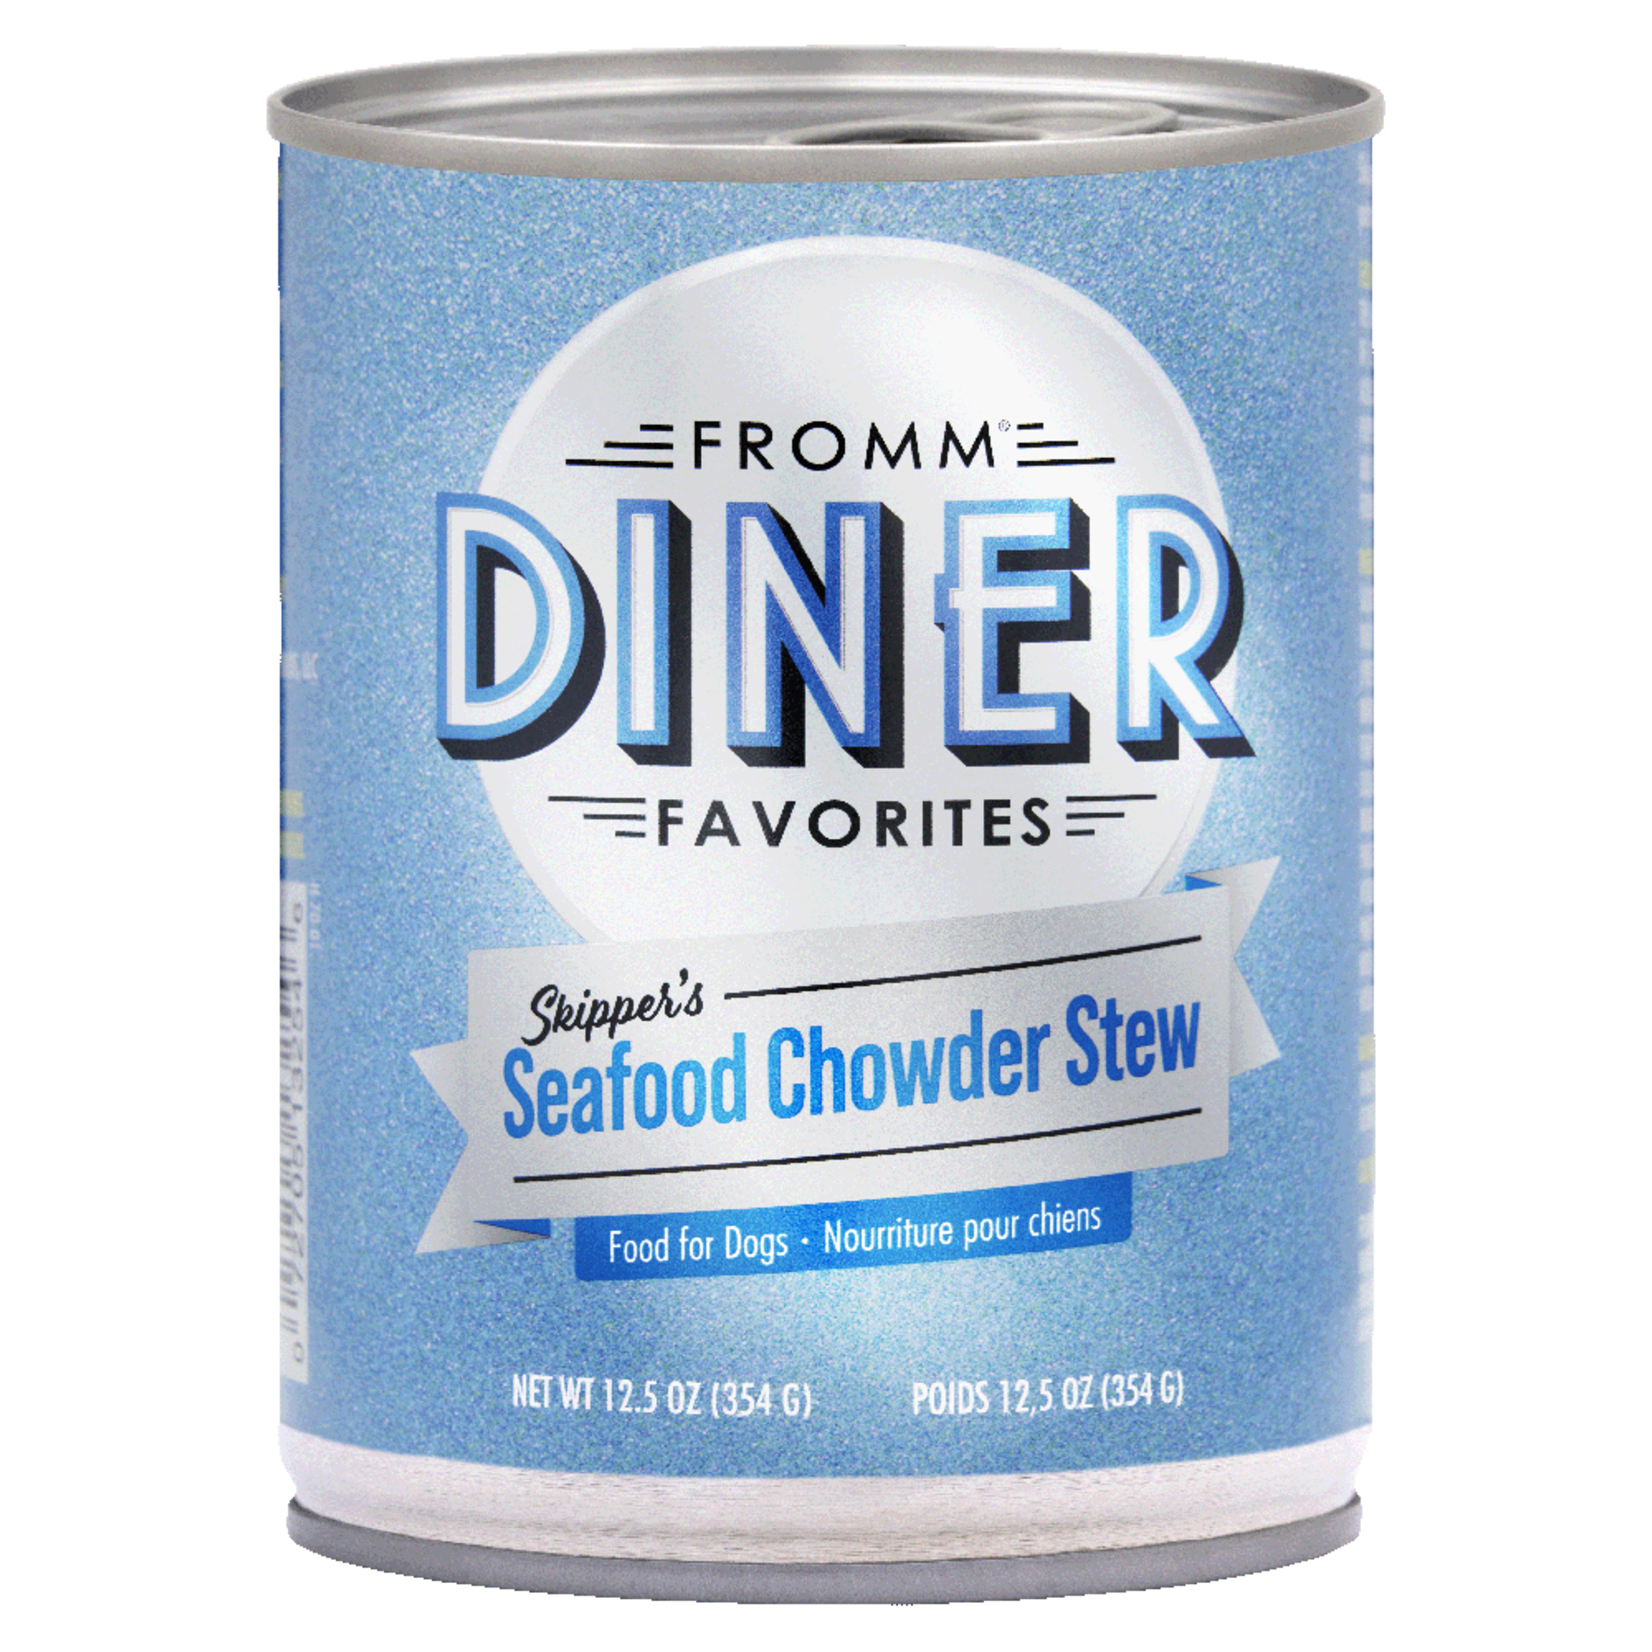 Fromm Fromm Seafood Chowder Stew Diner Favorites 12.5oz